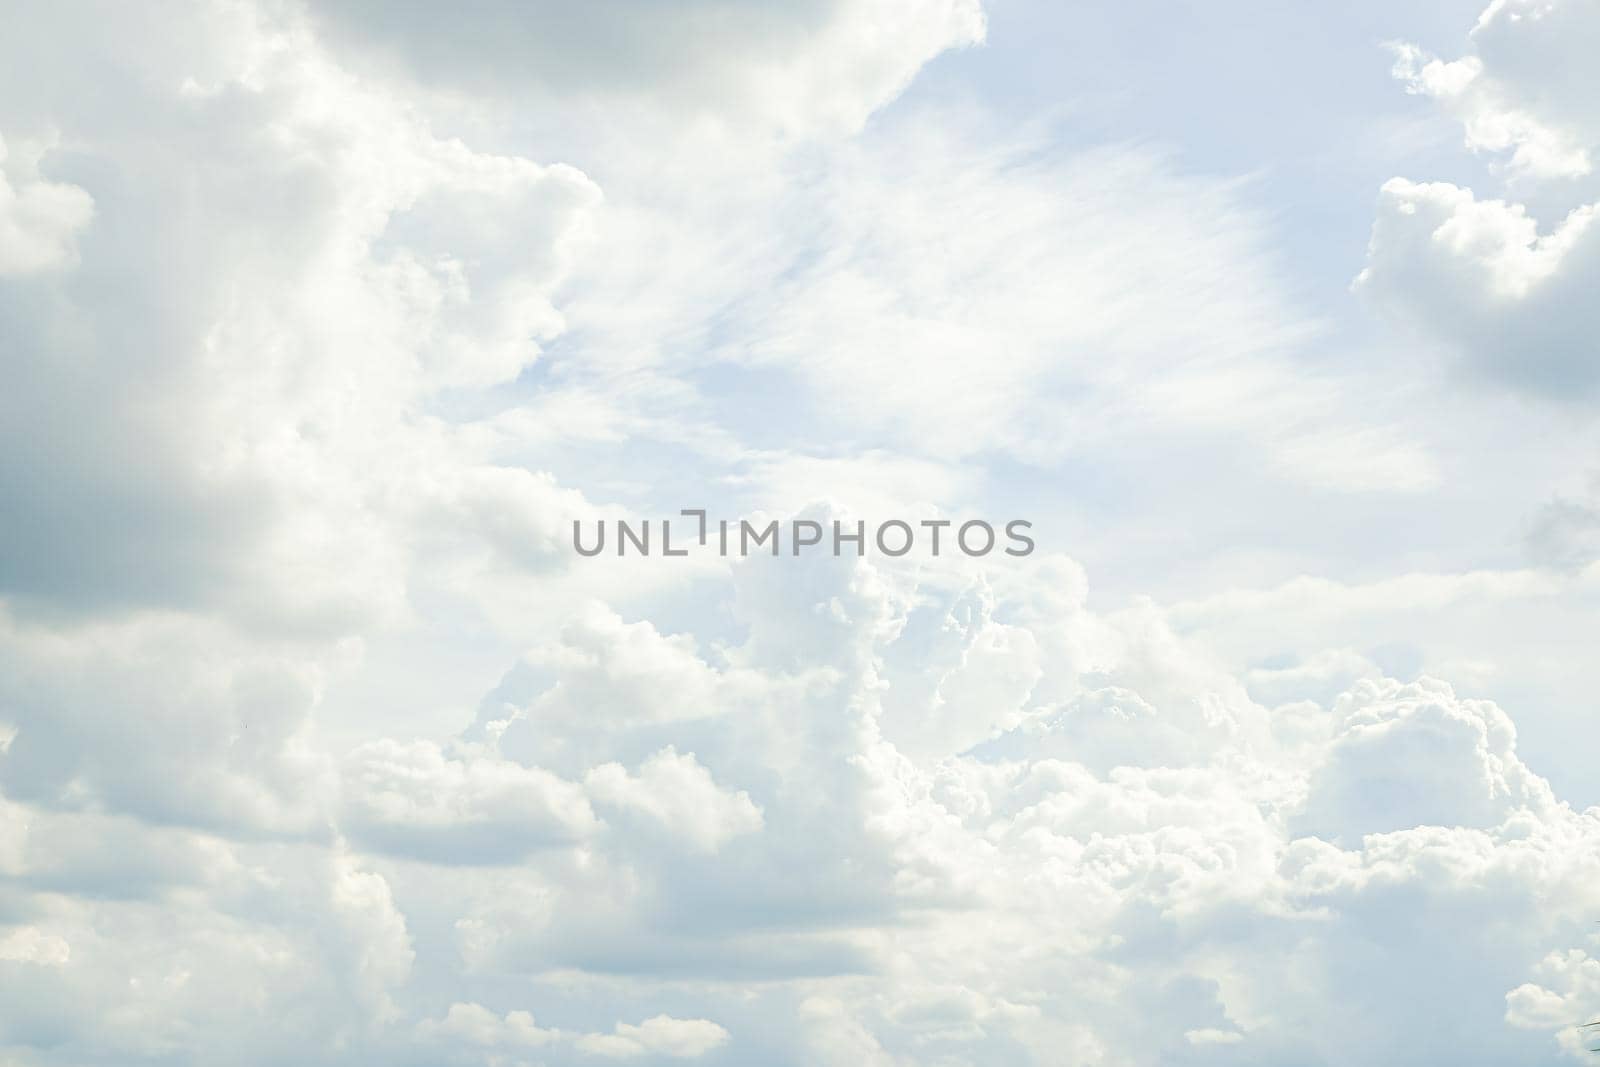 Abstract nature background with clouds in light tonality. White cumulus clouds